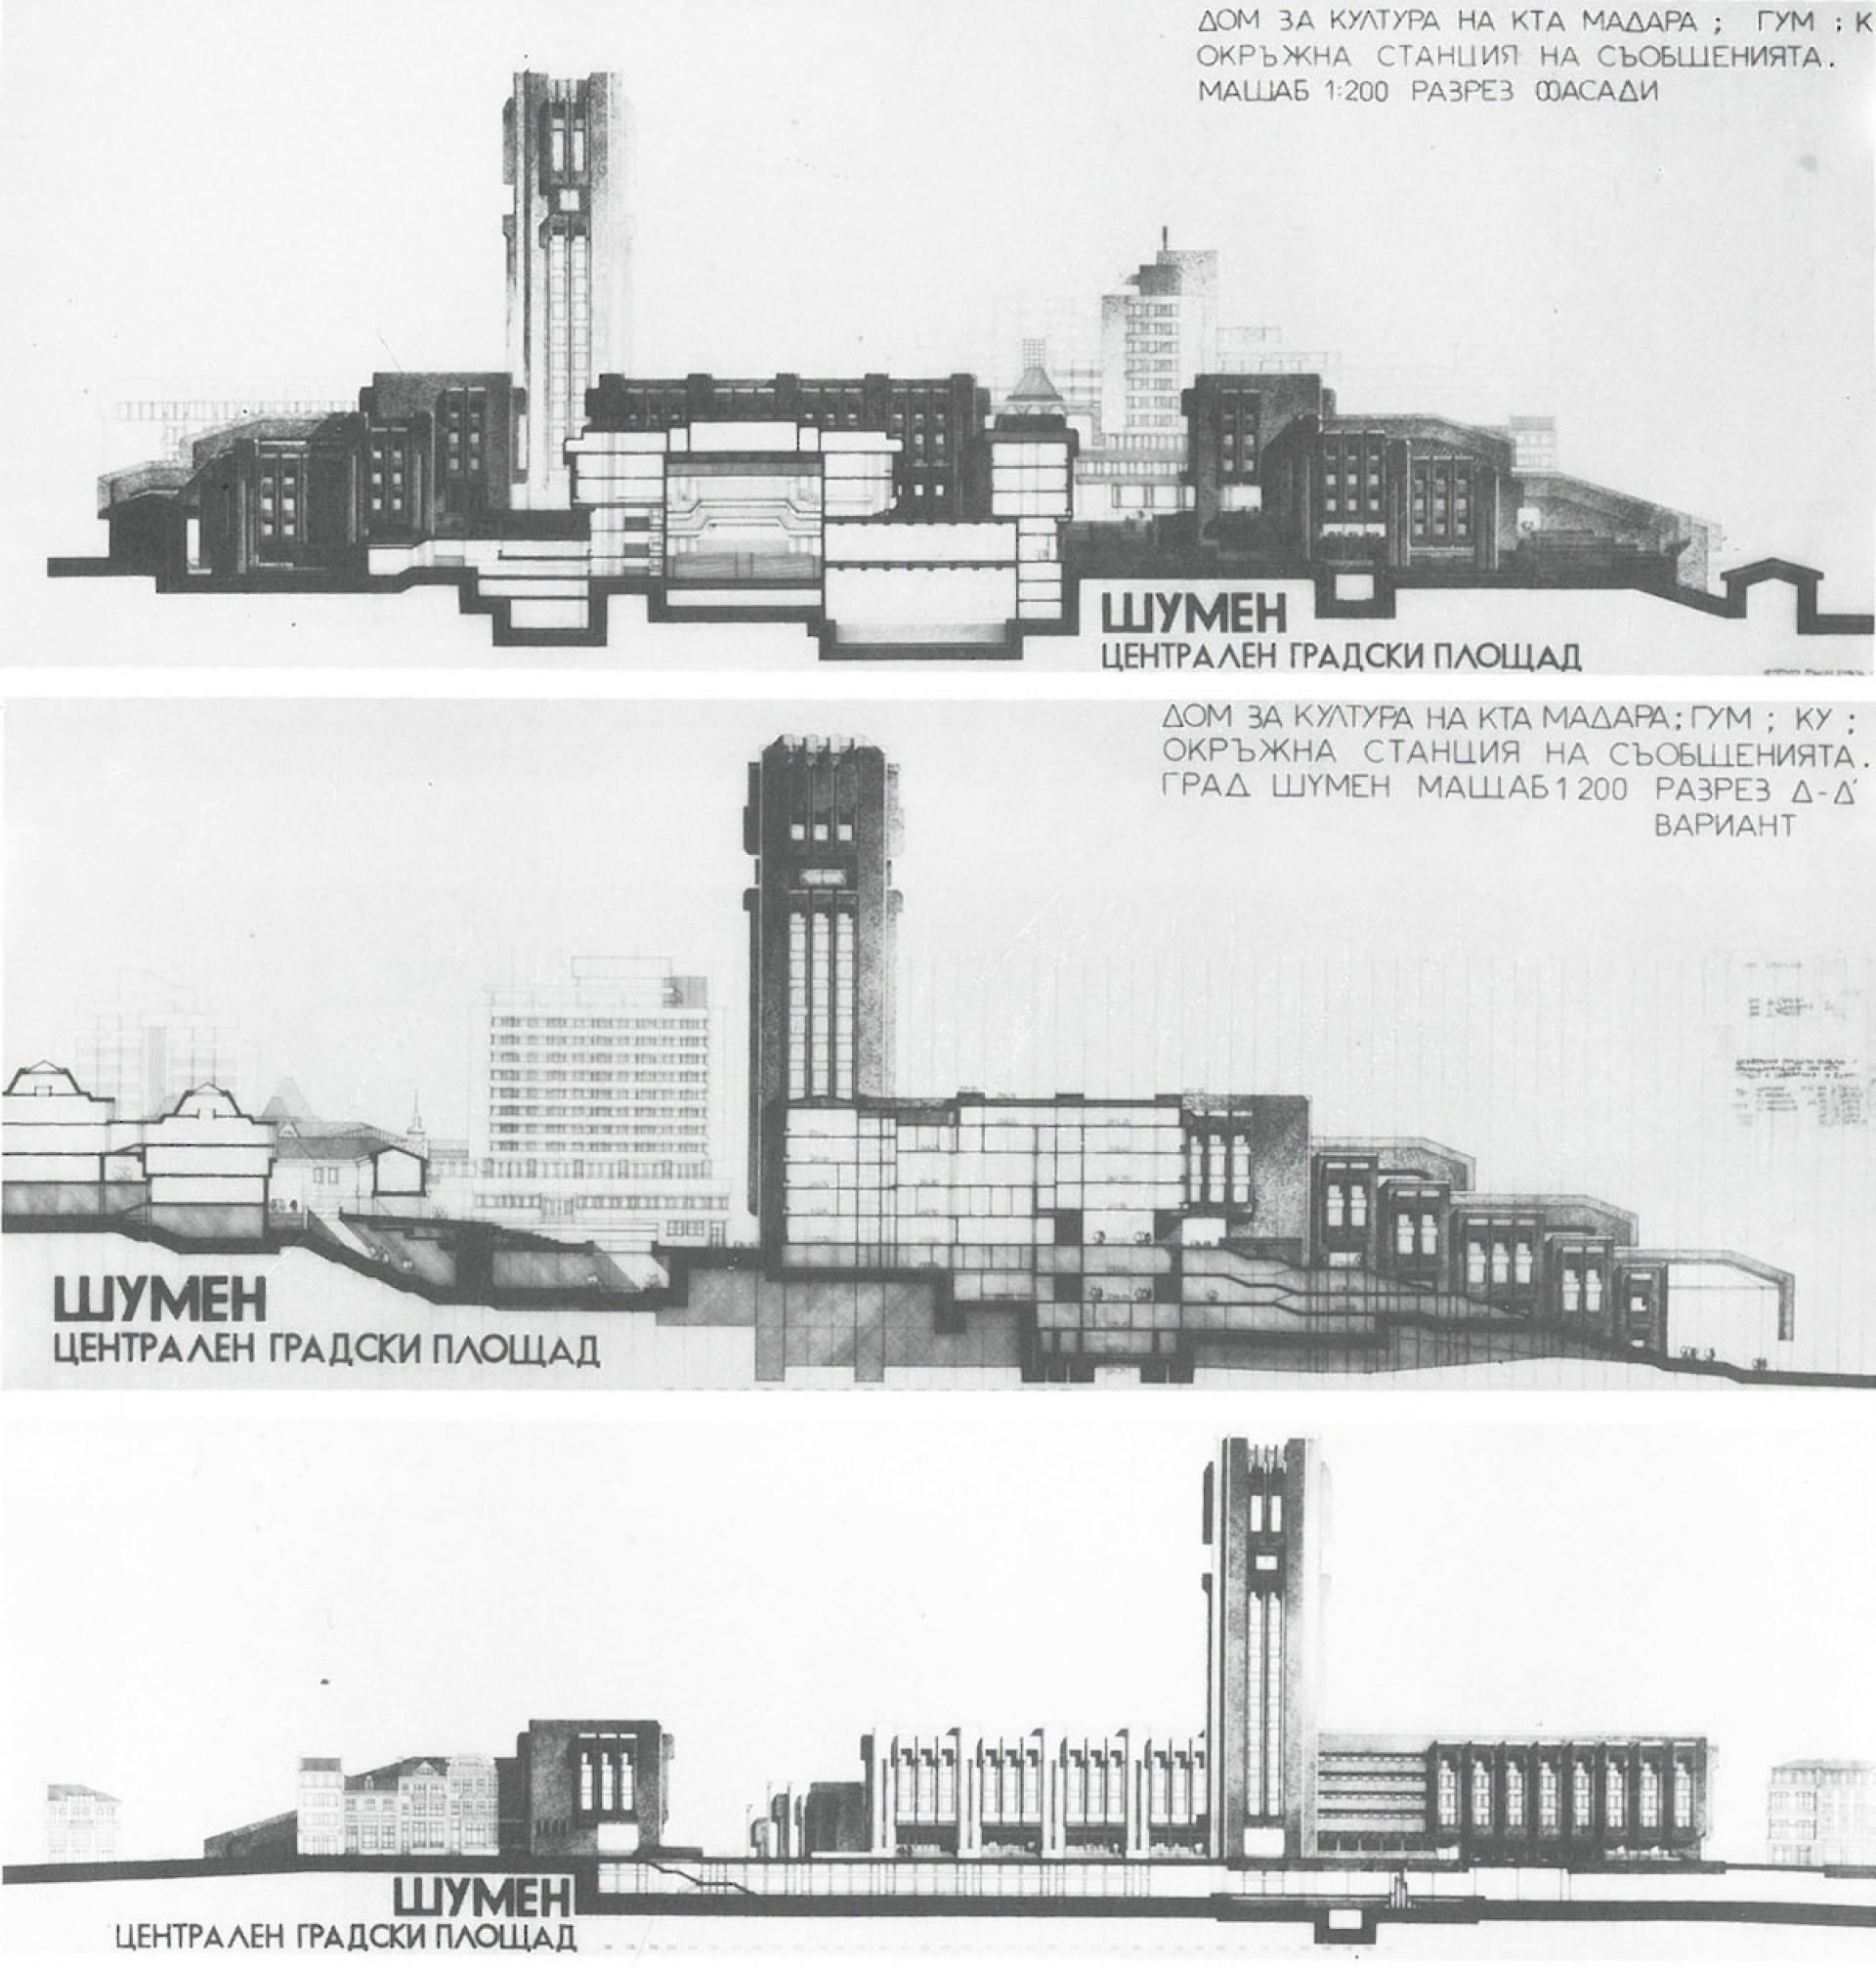 Preliminary (up left) and final (up right) building plan with silhouettes and cross sections (below). | Drawing via Promisljena estetika (1988) Vol. 1